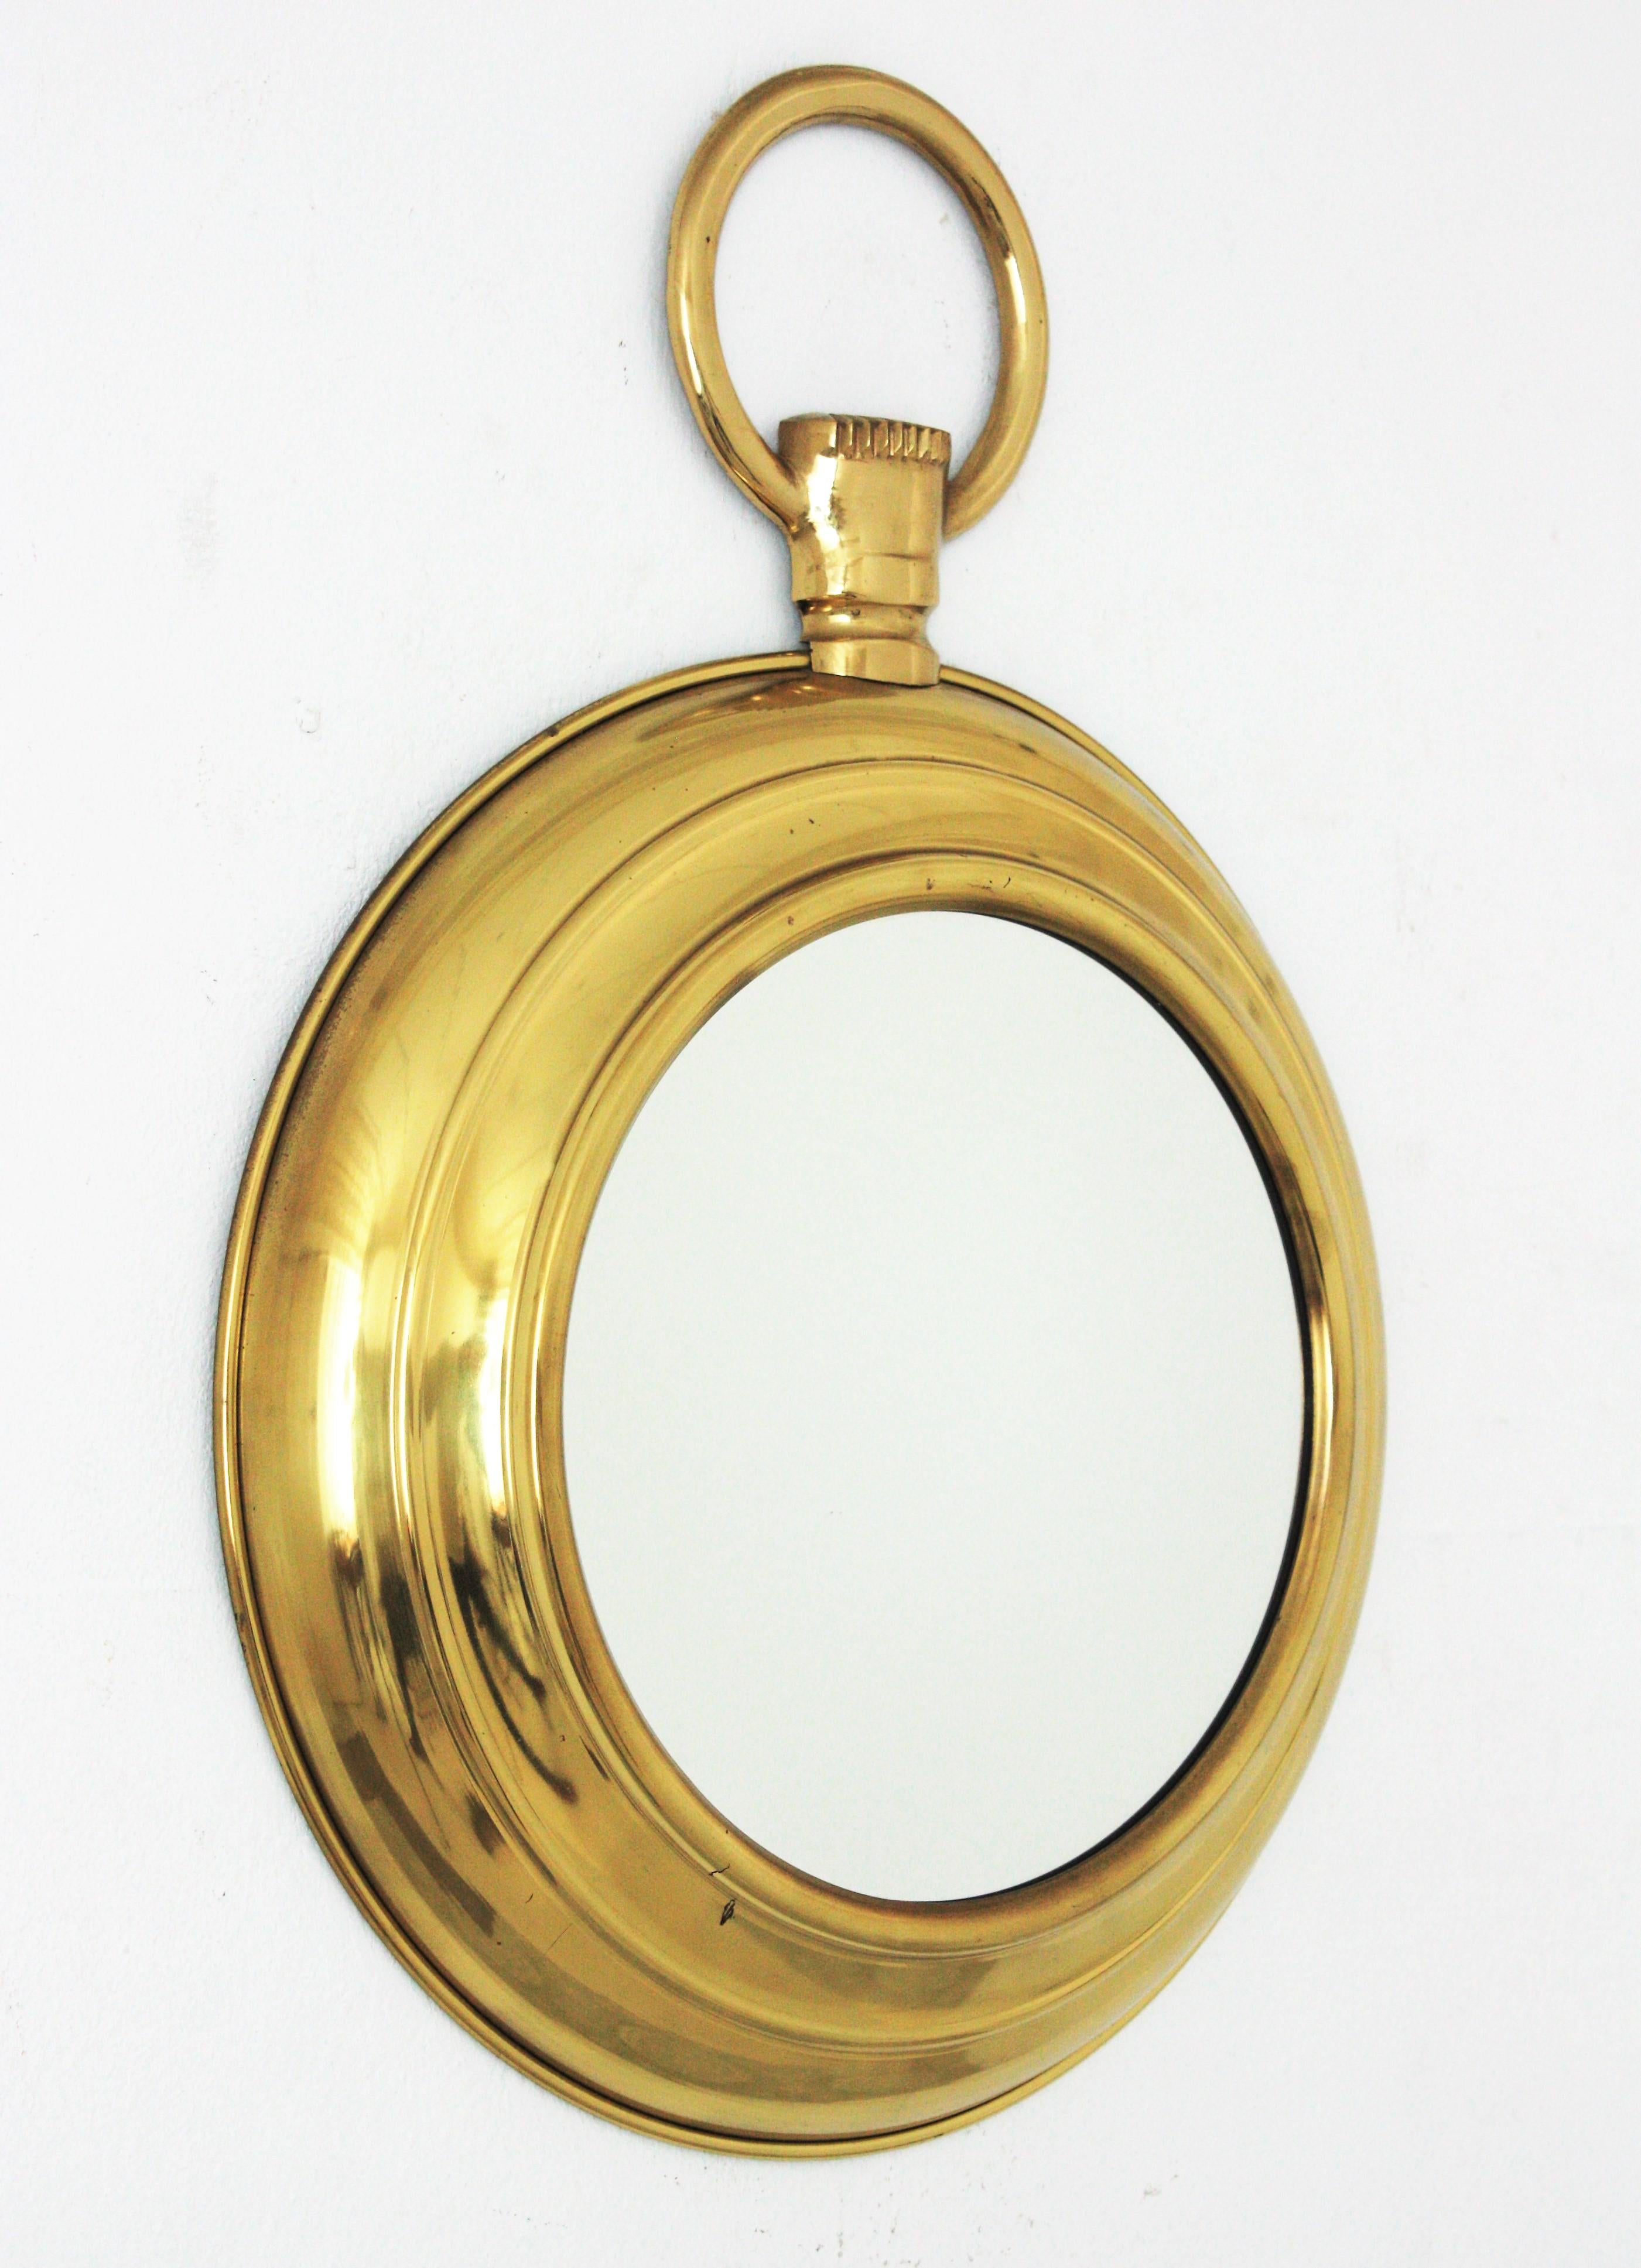 Fornasetti Style Midcentury Brass Pocket Watch Round Wall Mirror

Eye-catching brass pocket watch shaped wall mirror in the style of Piero Fornasetti. Italy, 1950s-1960s.
Nicely constructed.
This wall mirror will be a nice midcentury addition to any